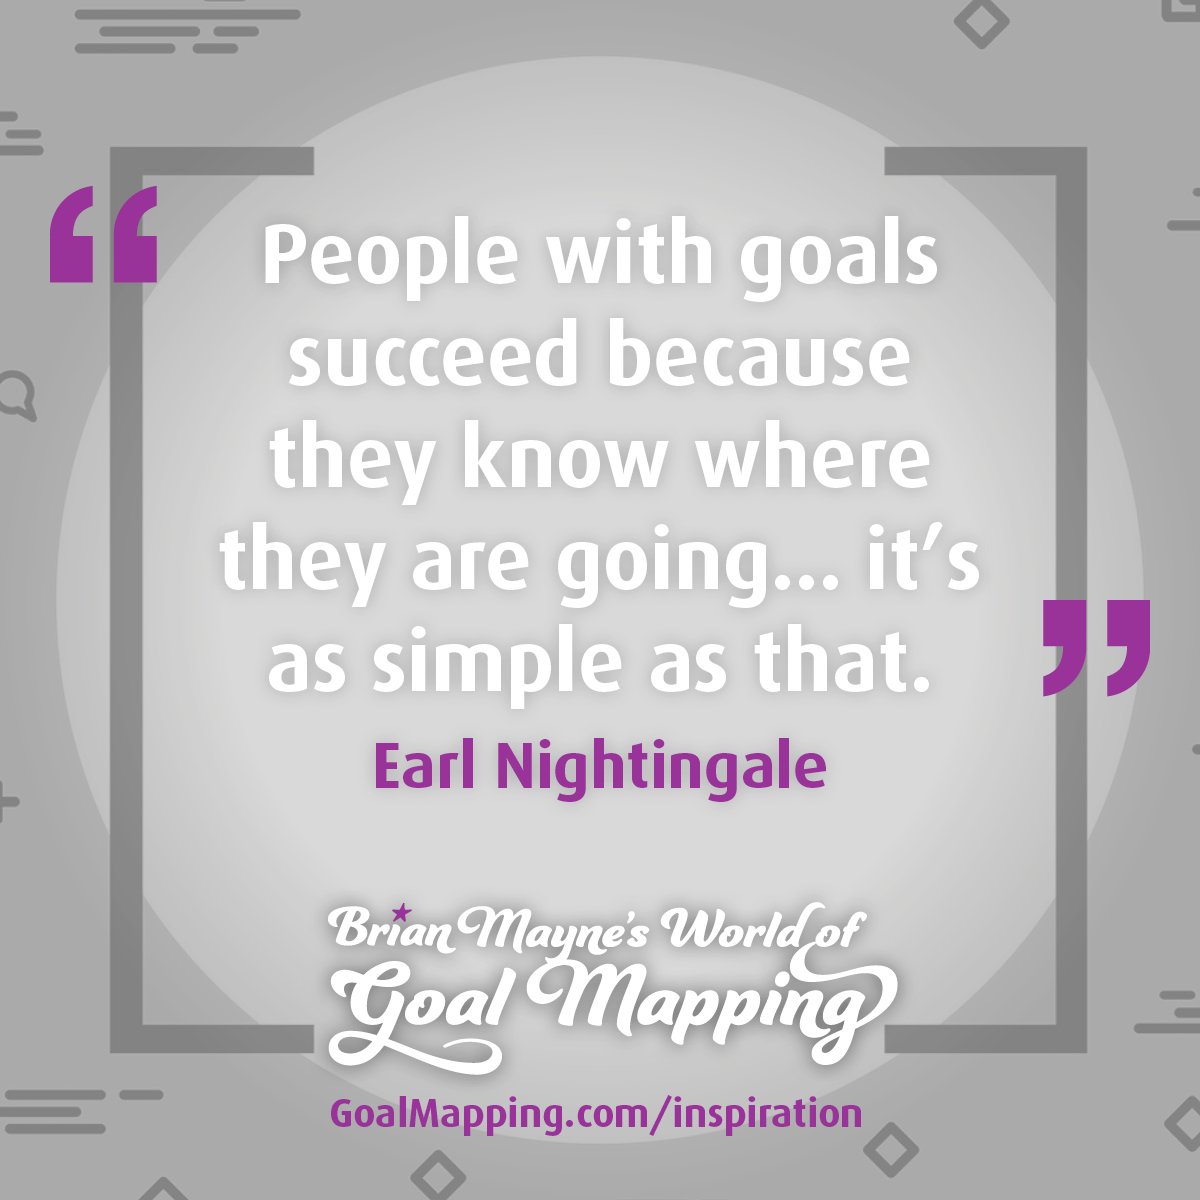 "People with goals succeed because they know where they are going... it’s as simple as that." Earl Nightingale